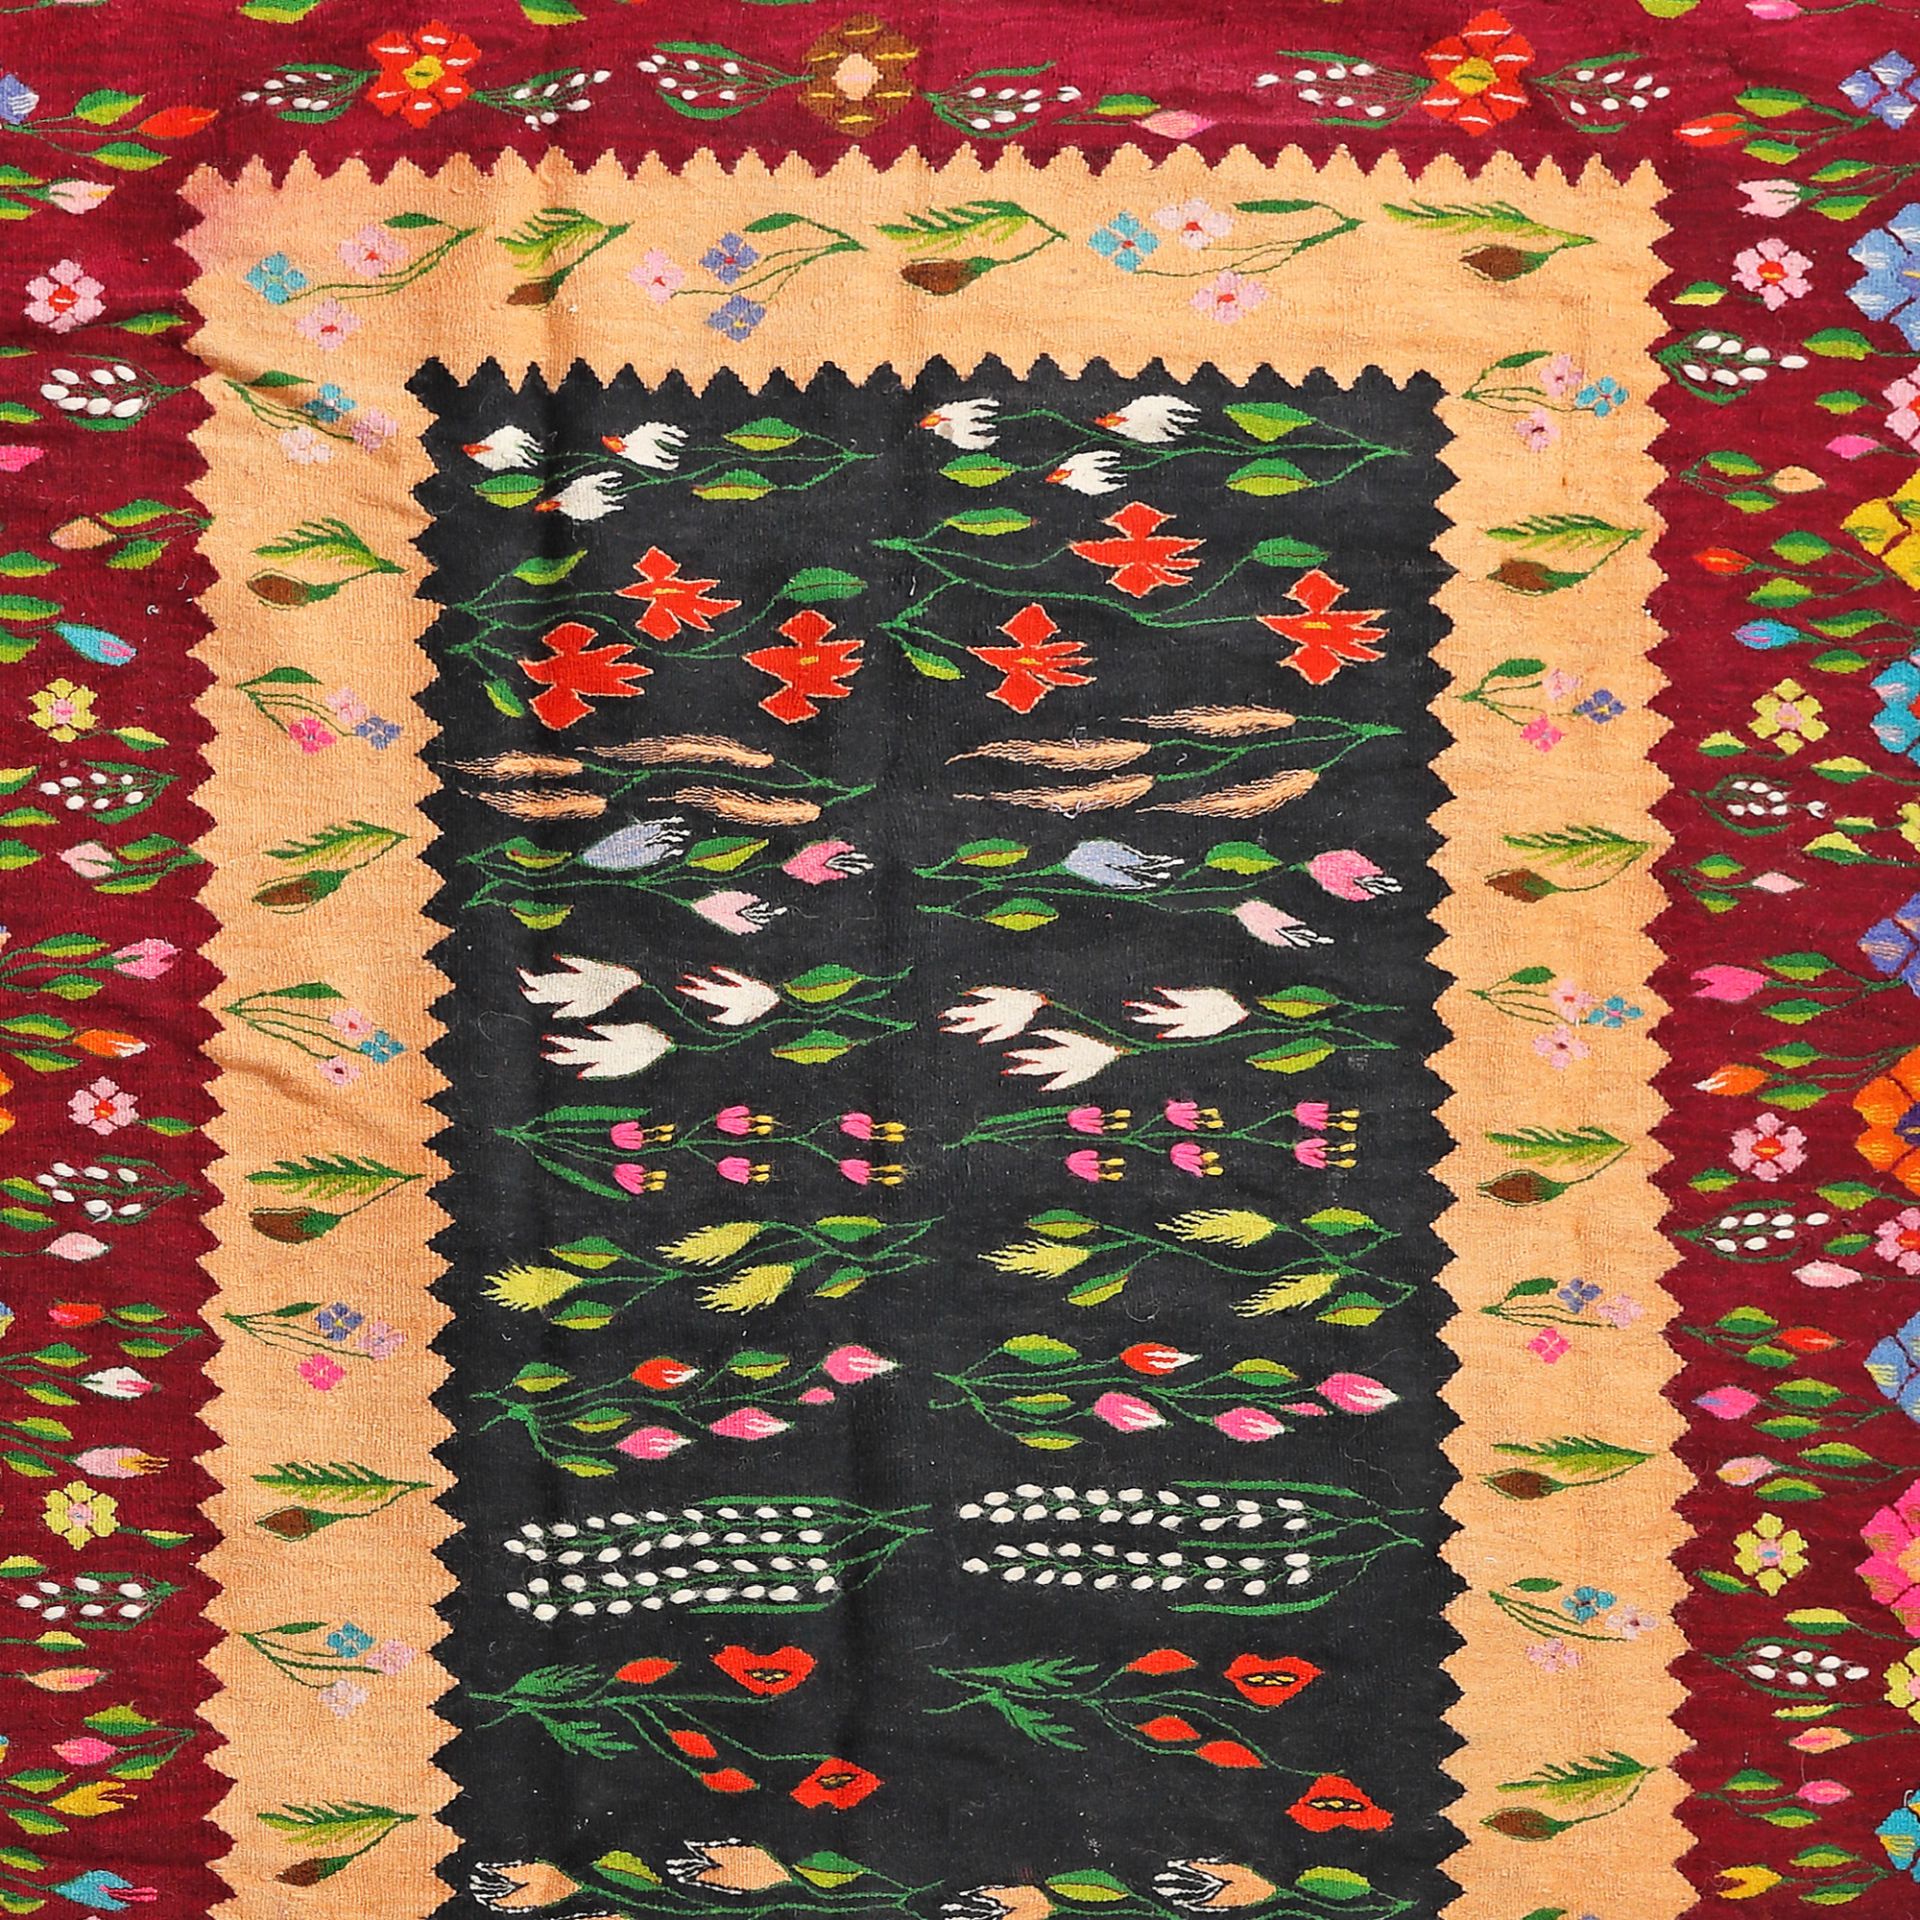 Oltenian wool rug, decorated with hollyhocks, tulips and lilies of the valley, mid-20th century - Image 2 of 2